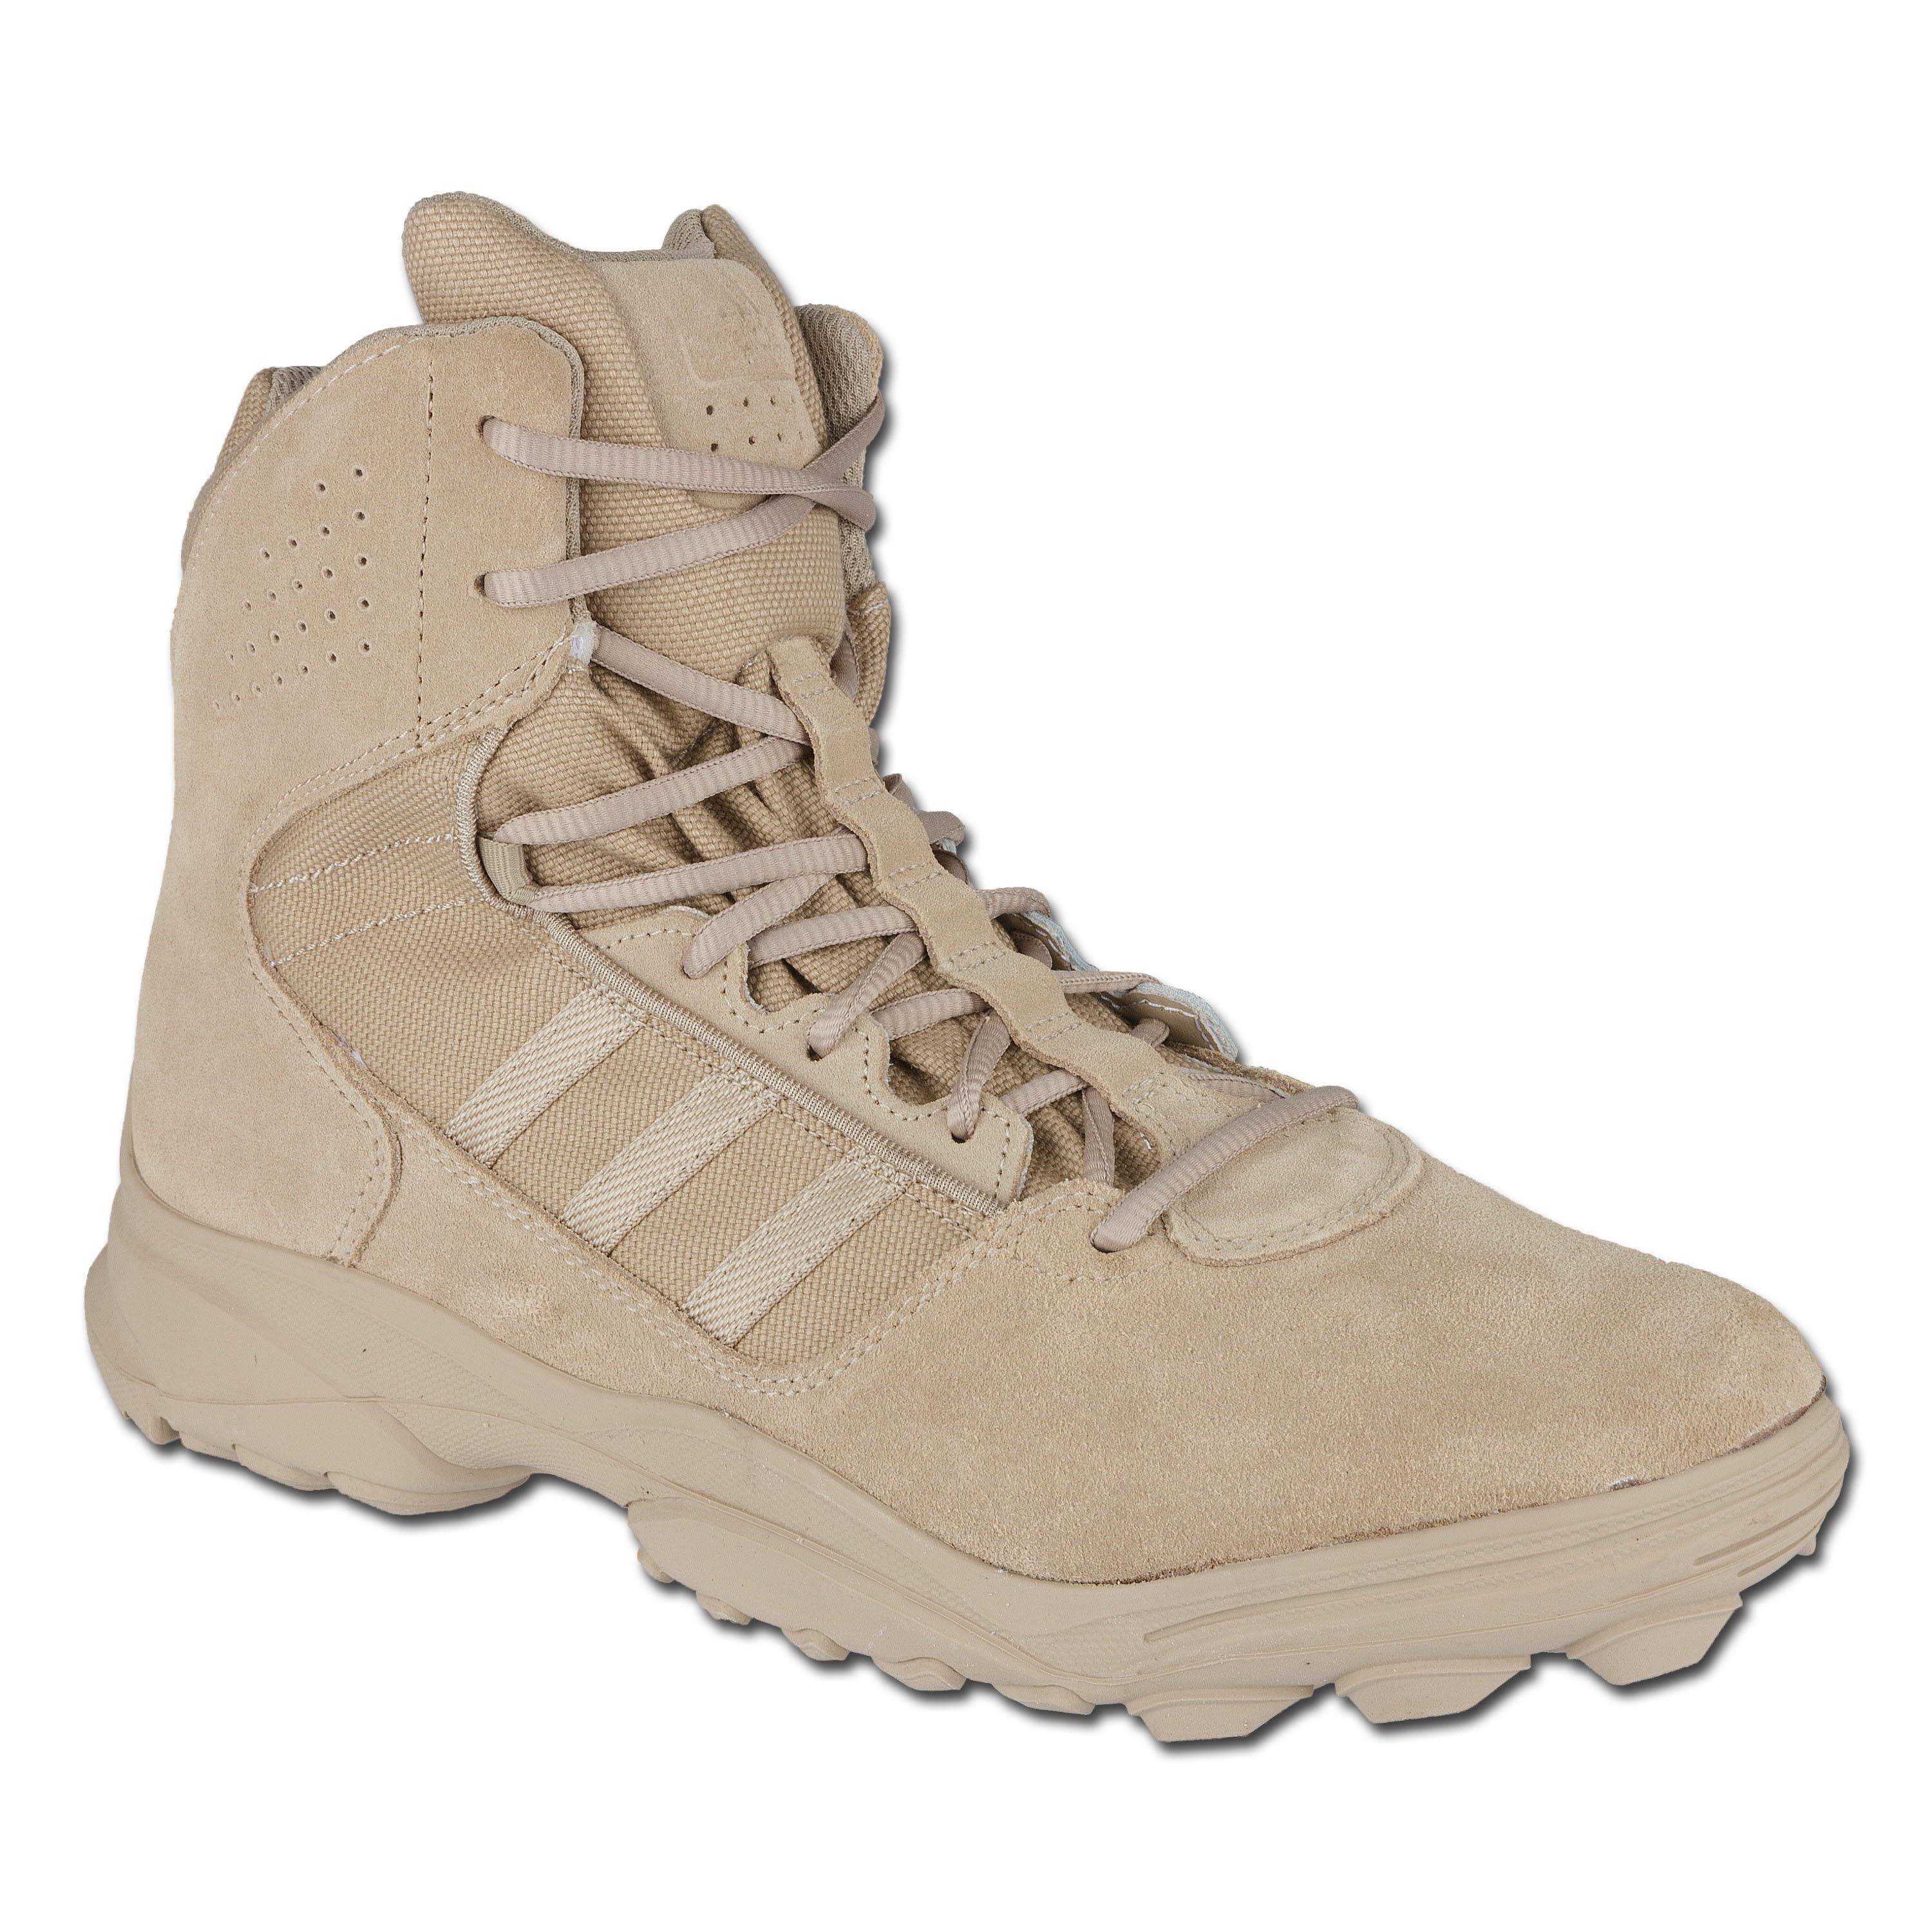 Boots Adidas GSG 9.3 | Tactical Boots Adidas 9.3 Combat Boots | Boots | Footwear | Clothing